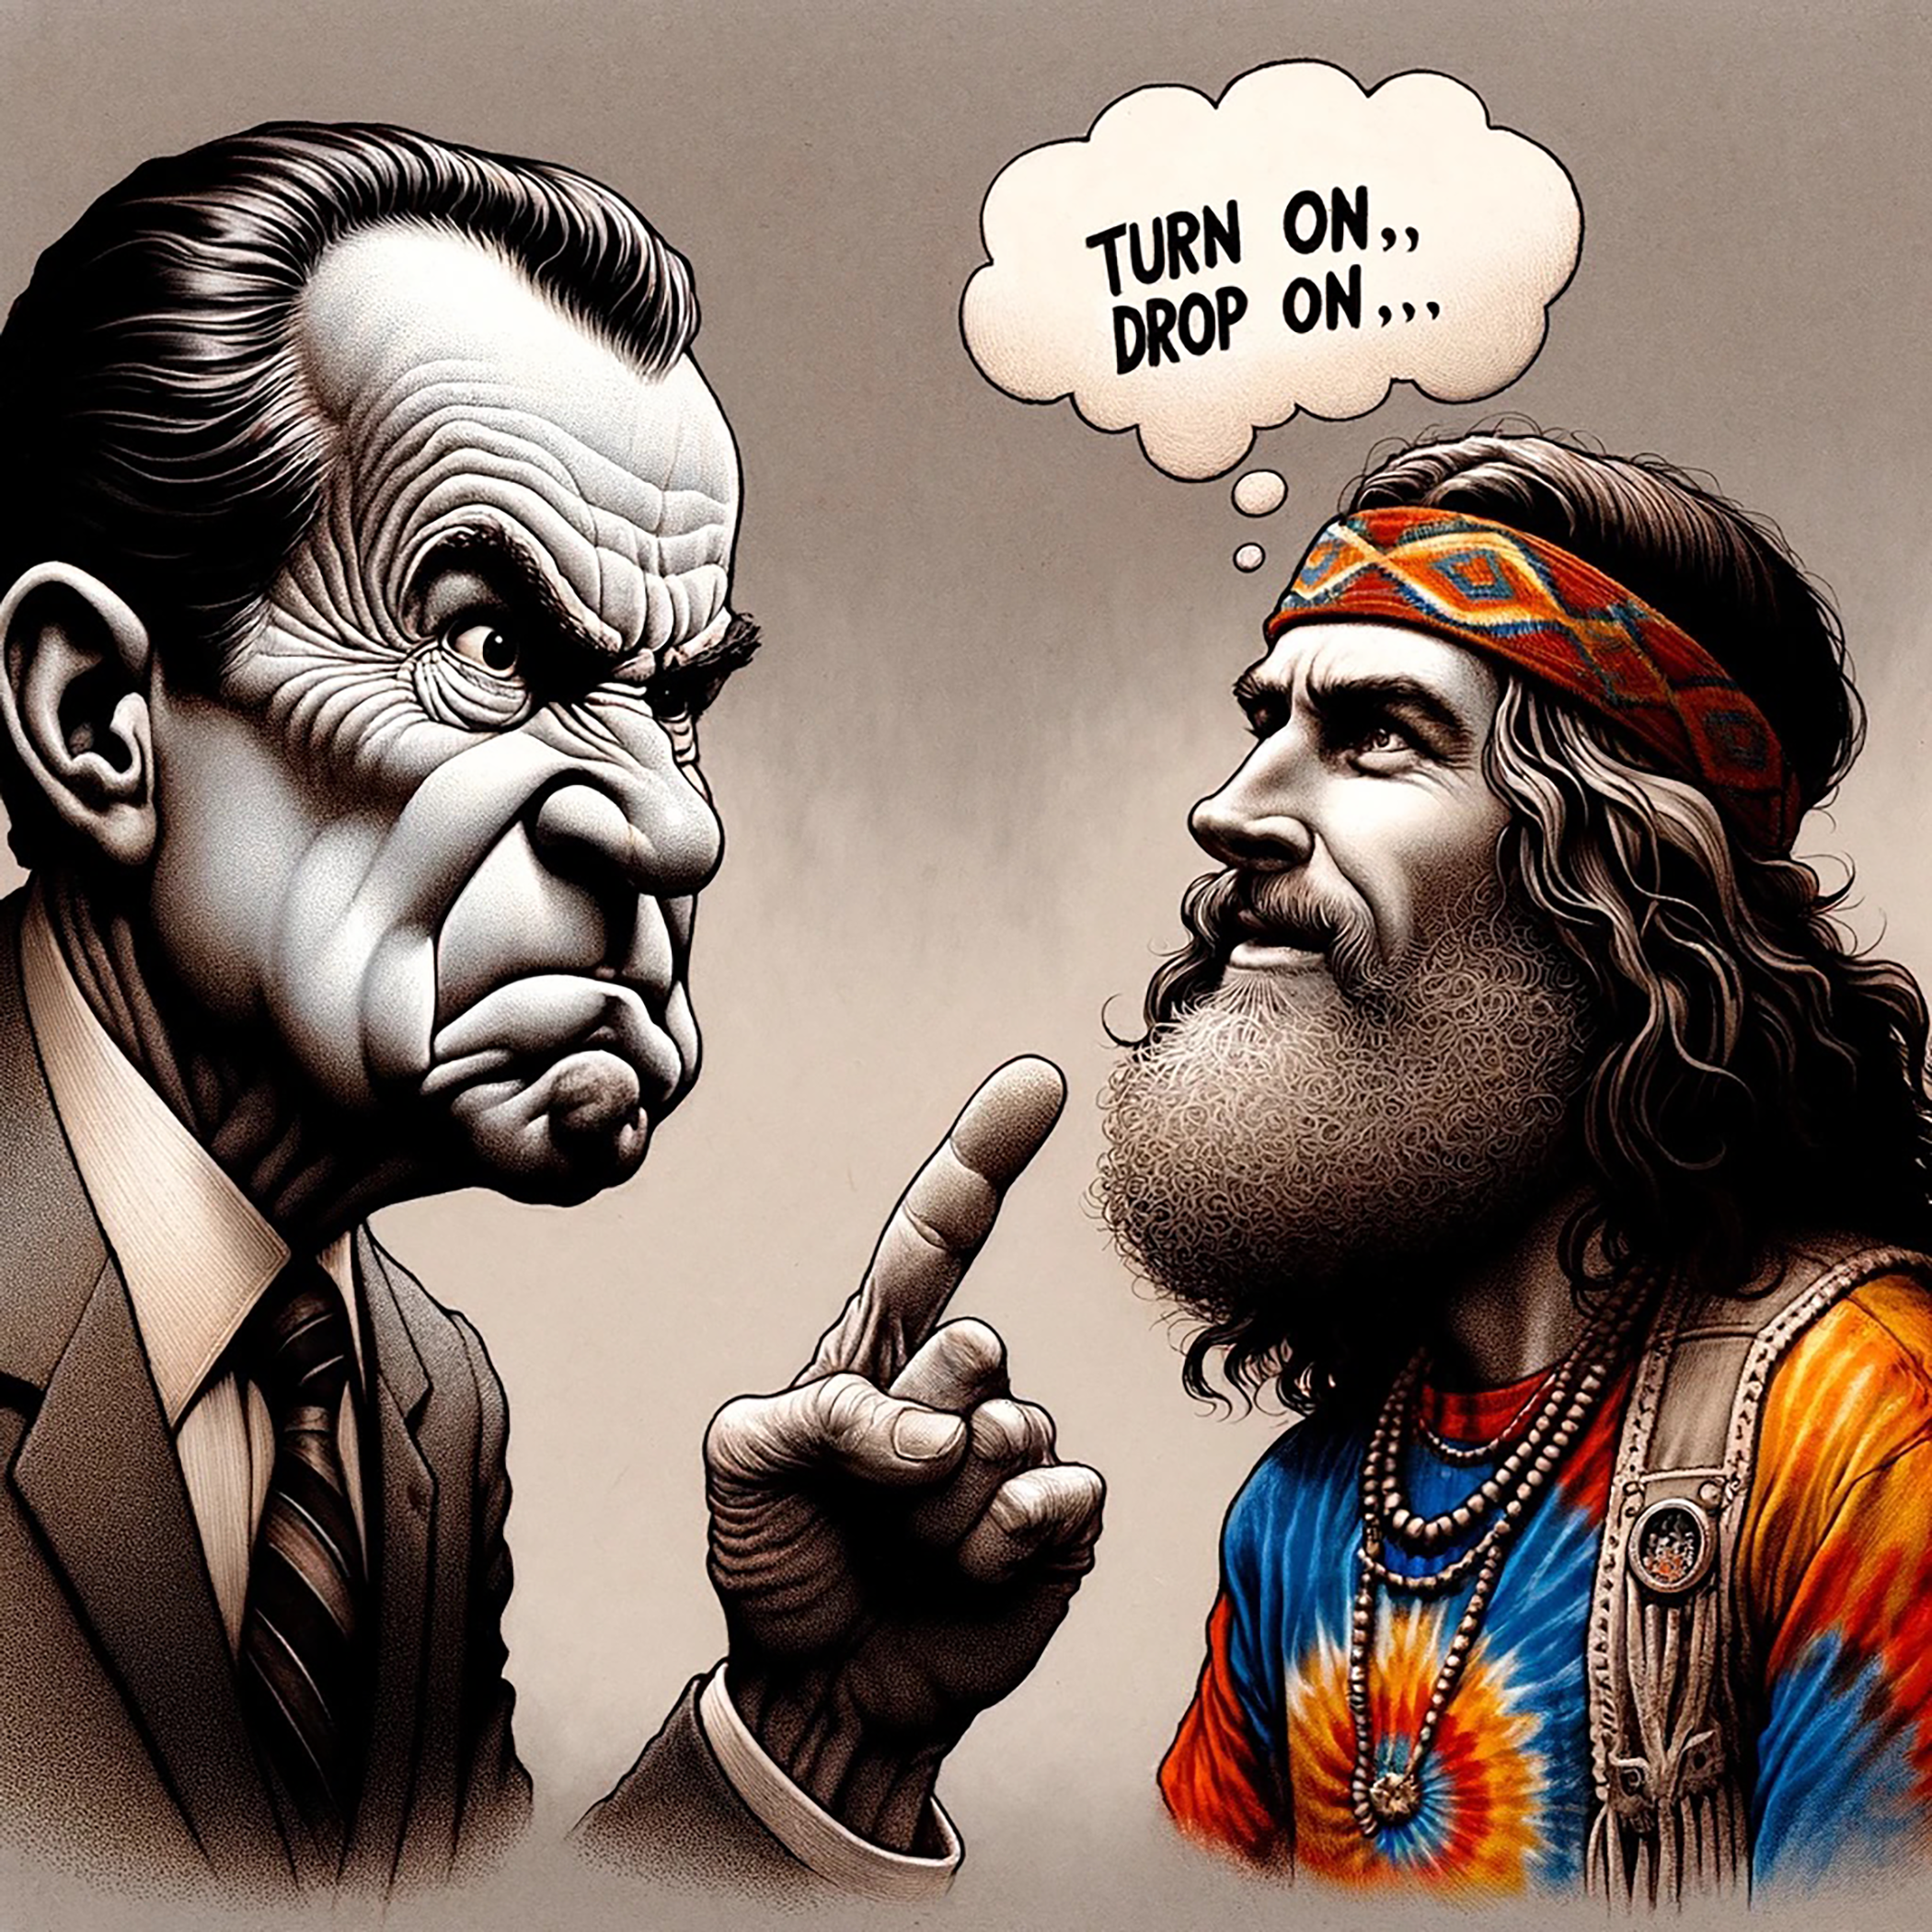 Nixon wags finger at "Timothy Leary"
